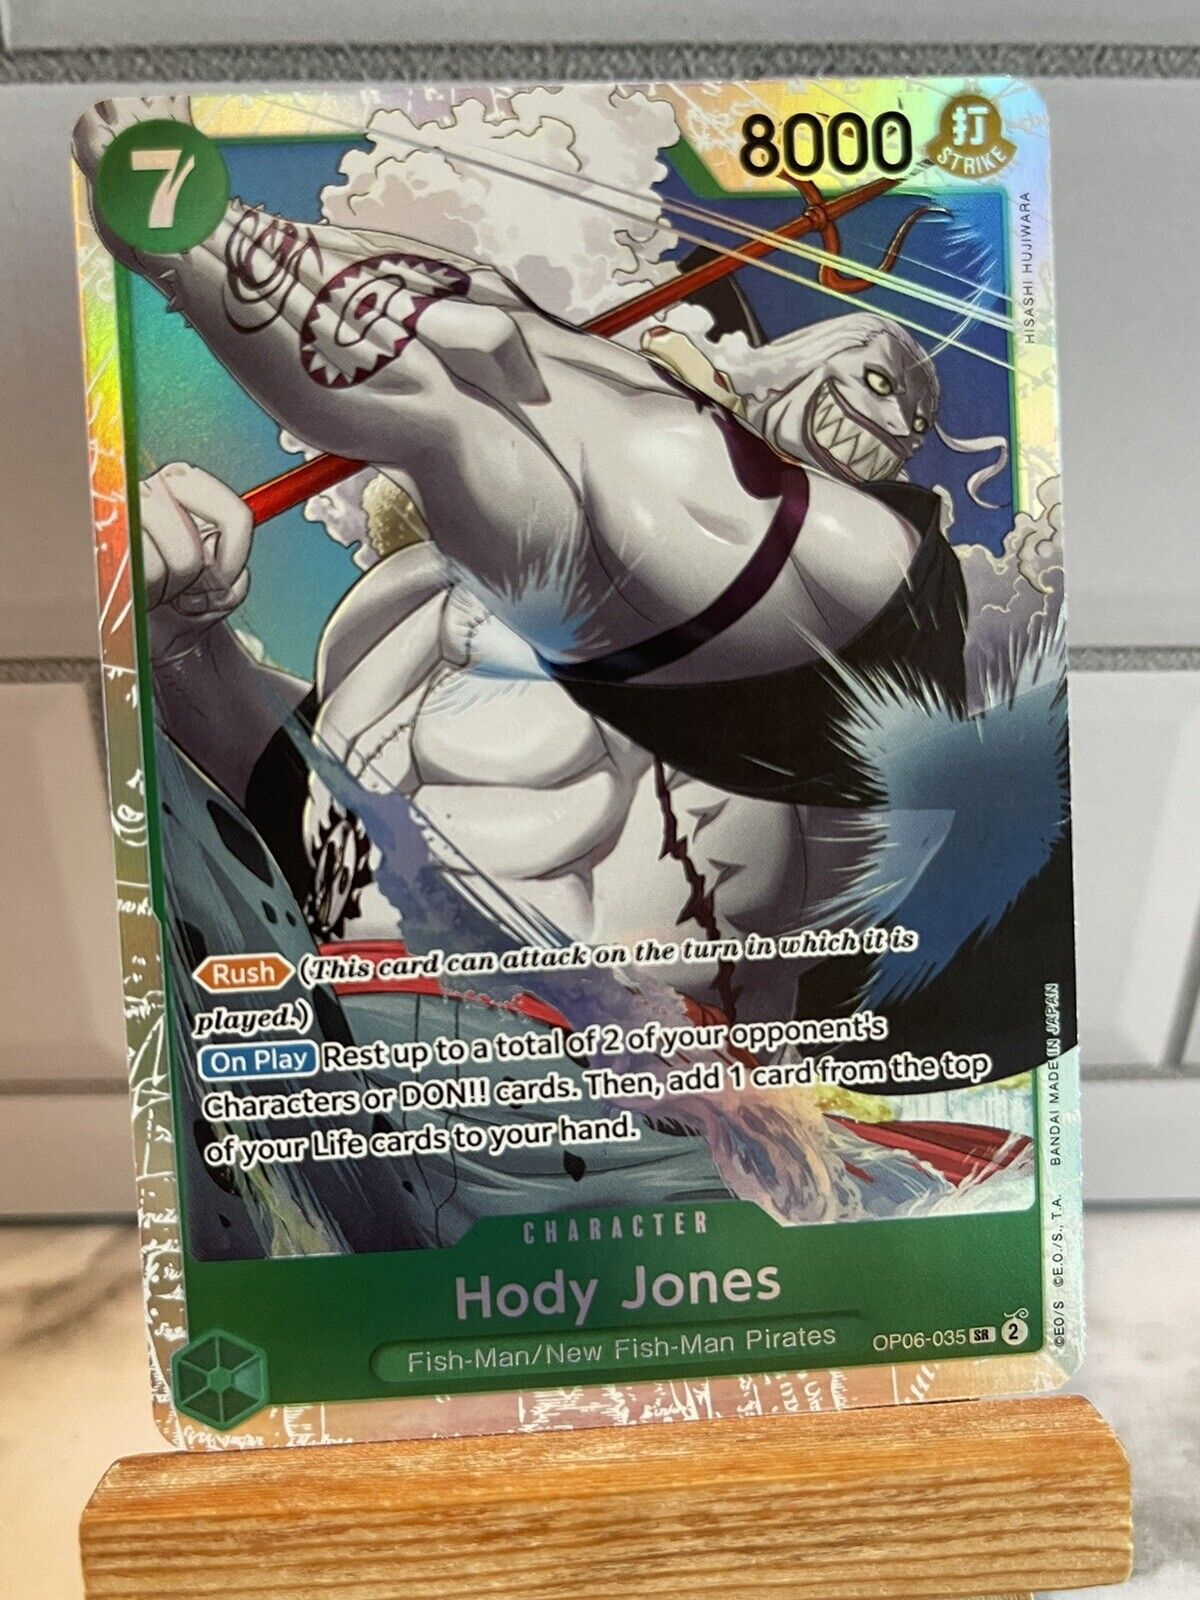 Hody Jones OP06-035 Wings of the Captain Super Rare ENGLISH One Piece Card